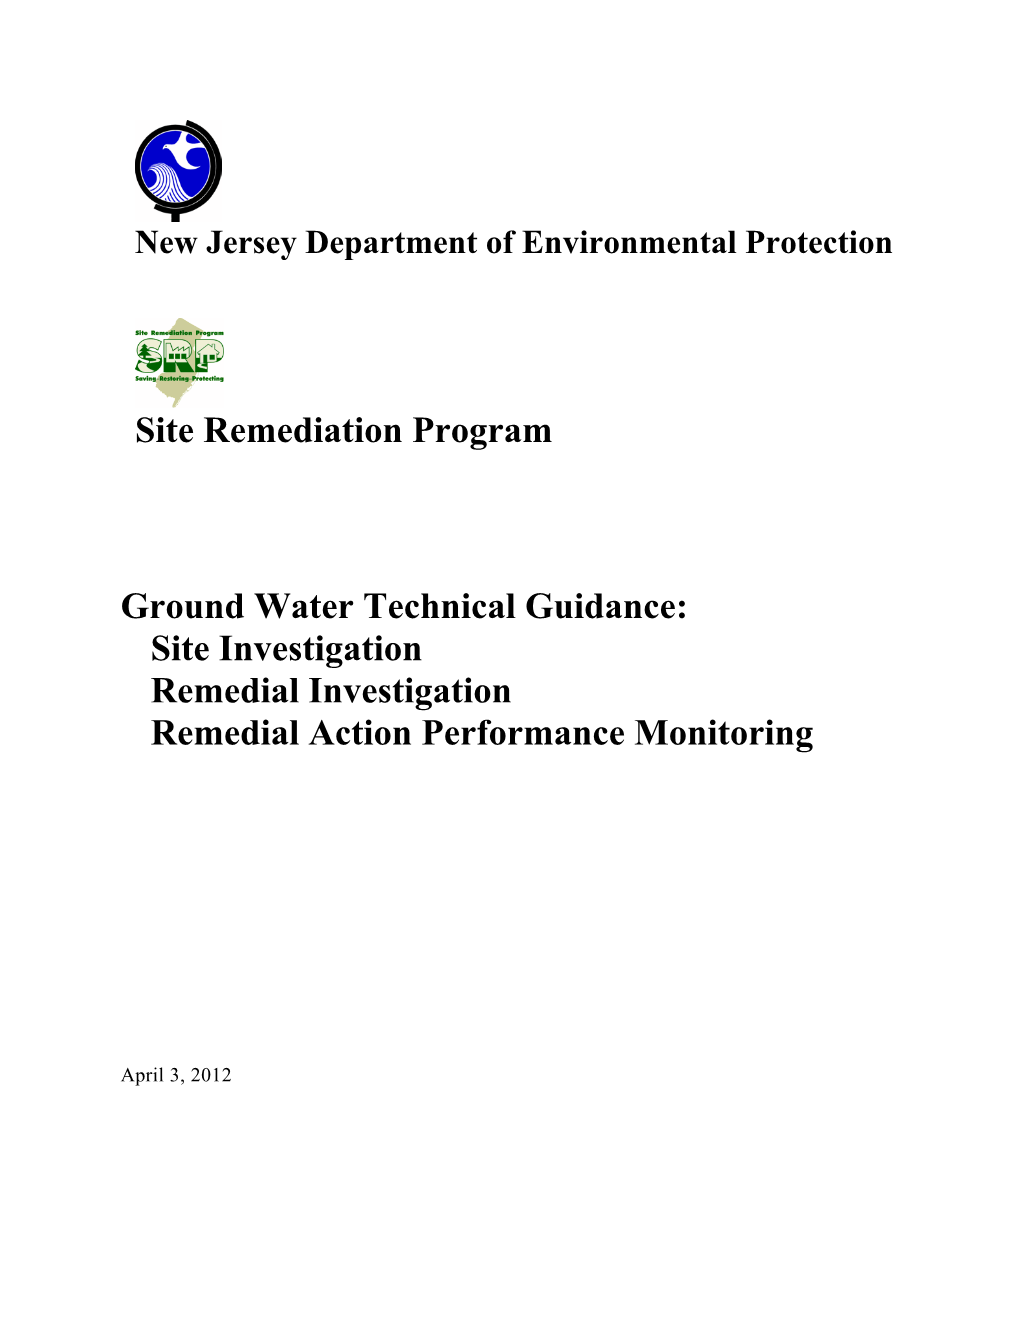 Site Remediation Program Ground Water Technical Guidance